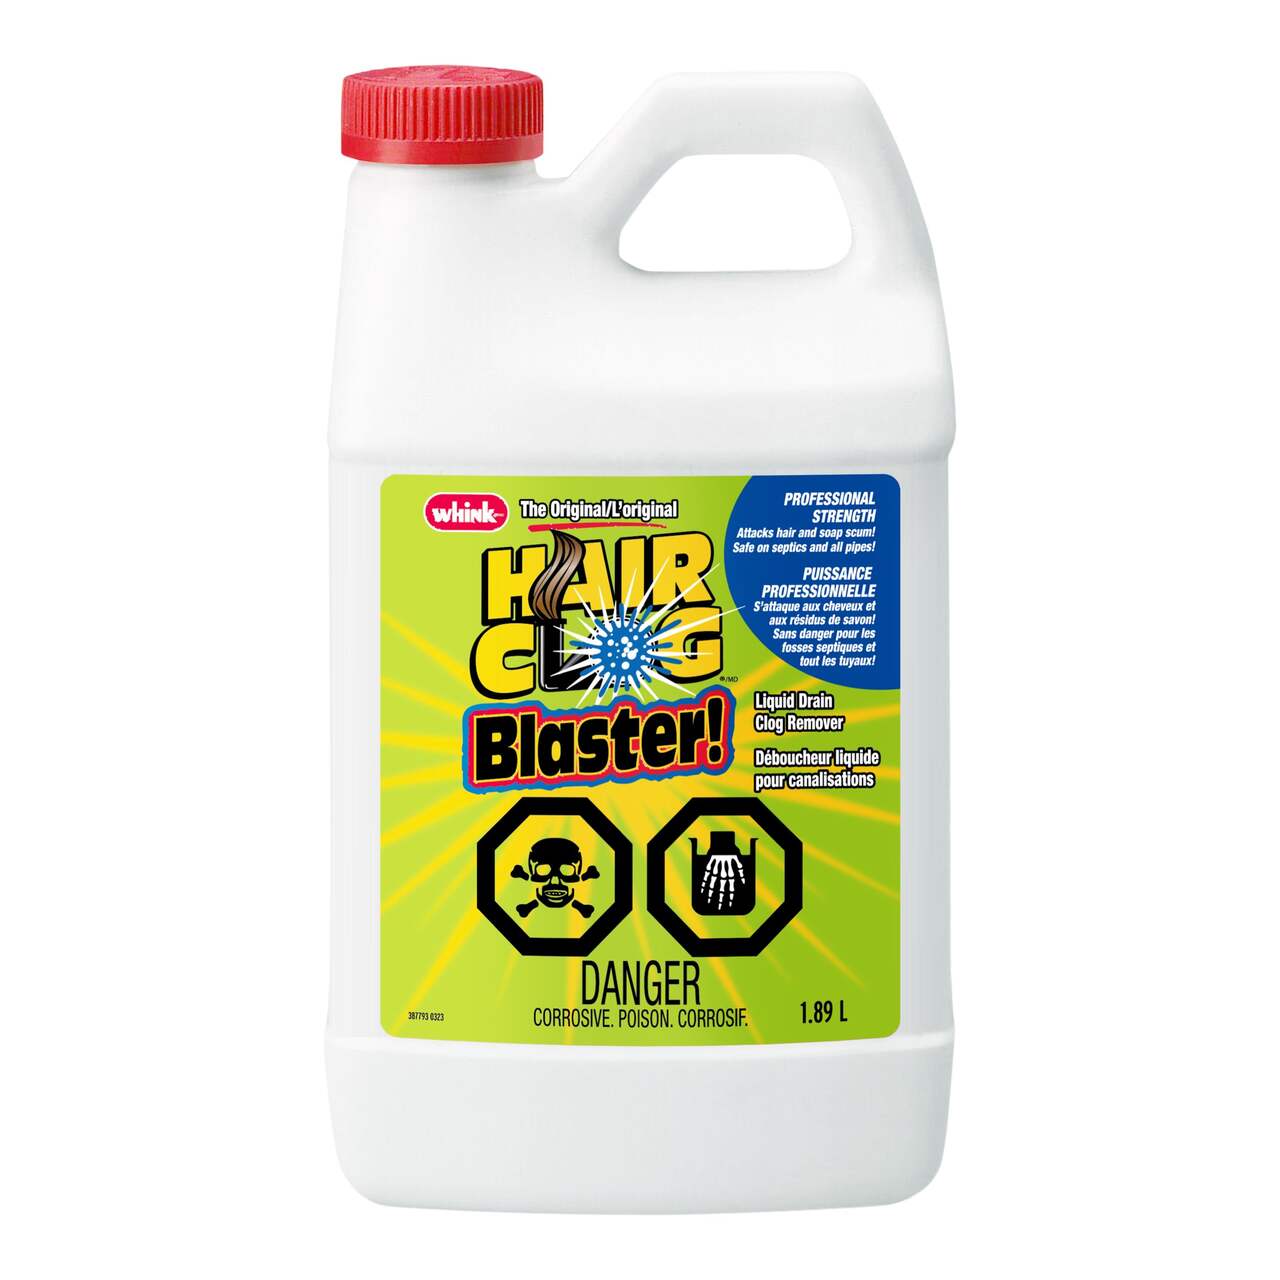 https://media-www.canadiantire.ca/product/living/cleaning/household-cleaning-solutions/1531874/whink-hair-clog-blaster-1-89l-6a36108e-c30e-4941-b296-f2c94147d933-jpgrendition.jpg?imdensity=1&imwidth=640&impolicy=mZoom